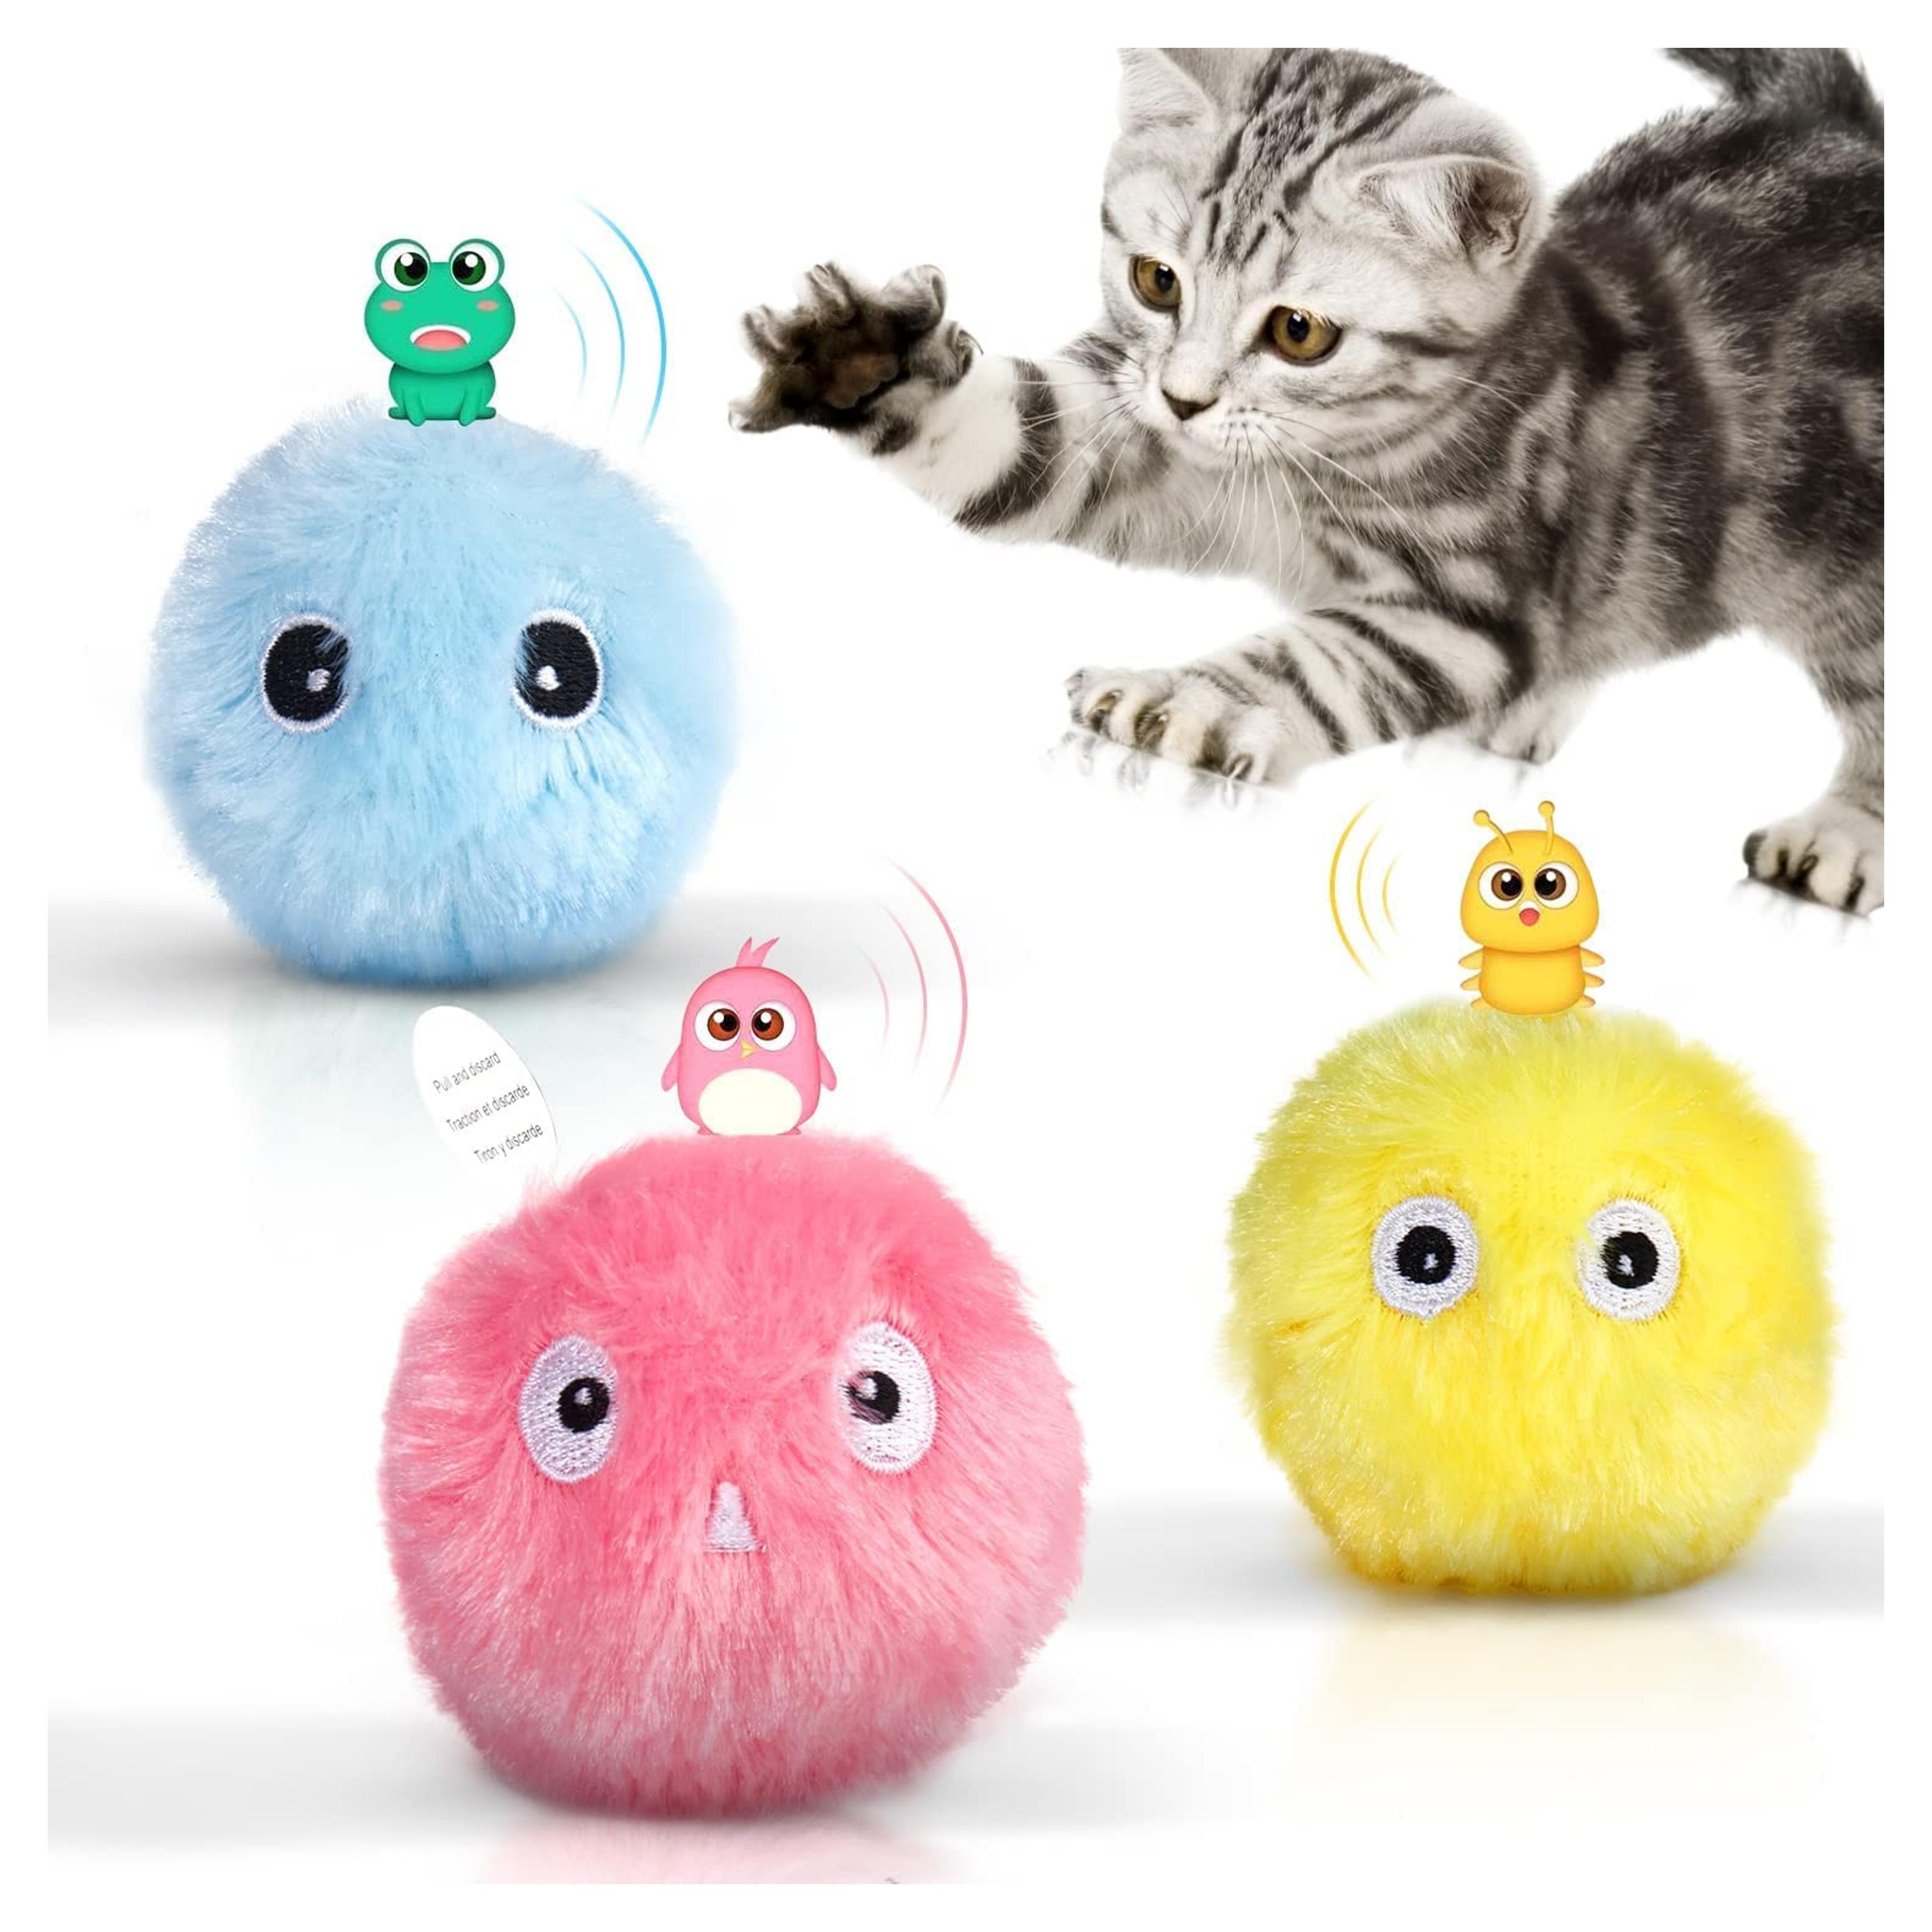 Potaroma 3 Pcs Fluffy Plush Cat Ball Toys with Sparkling Lights, Silvervine Catnip Toys, Interactive Chirping Balls Cat Kickers, 3 Lifelike Animal Sounds, Kitty Kitten Exercise Toys